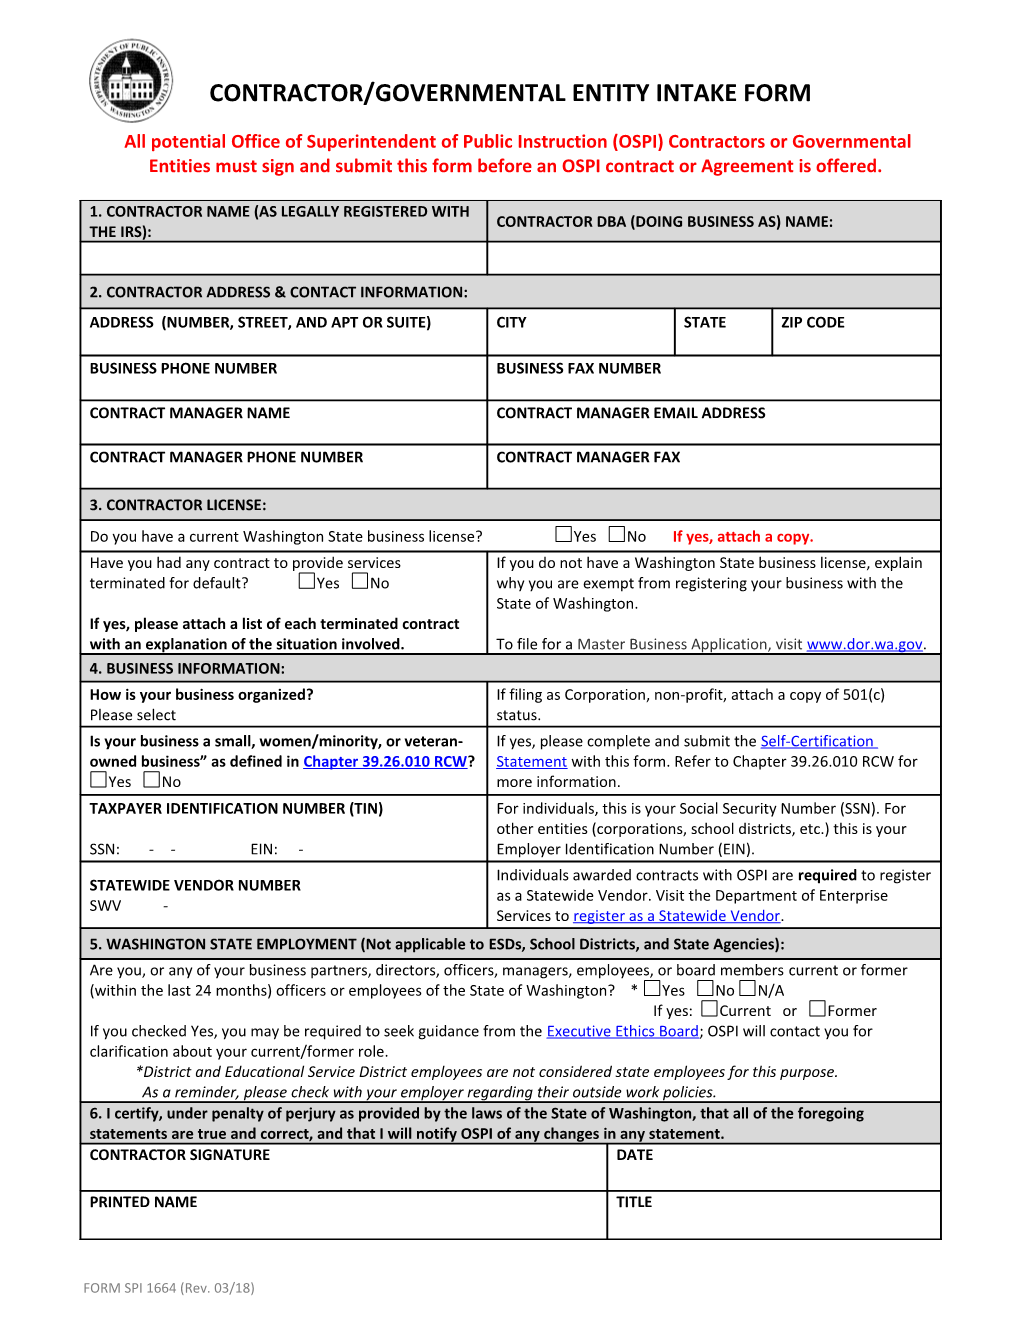 OSPI Contractor Intake Form